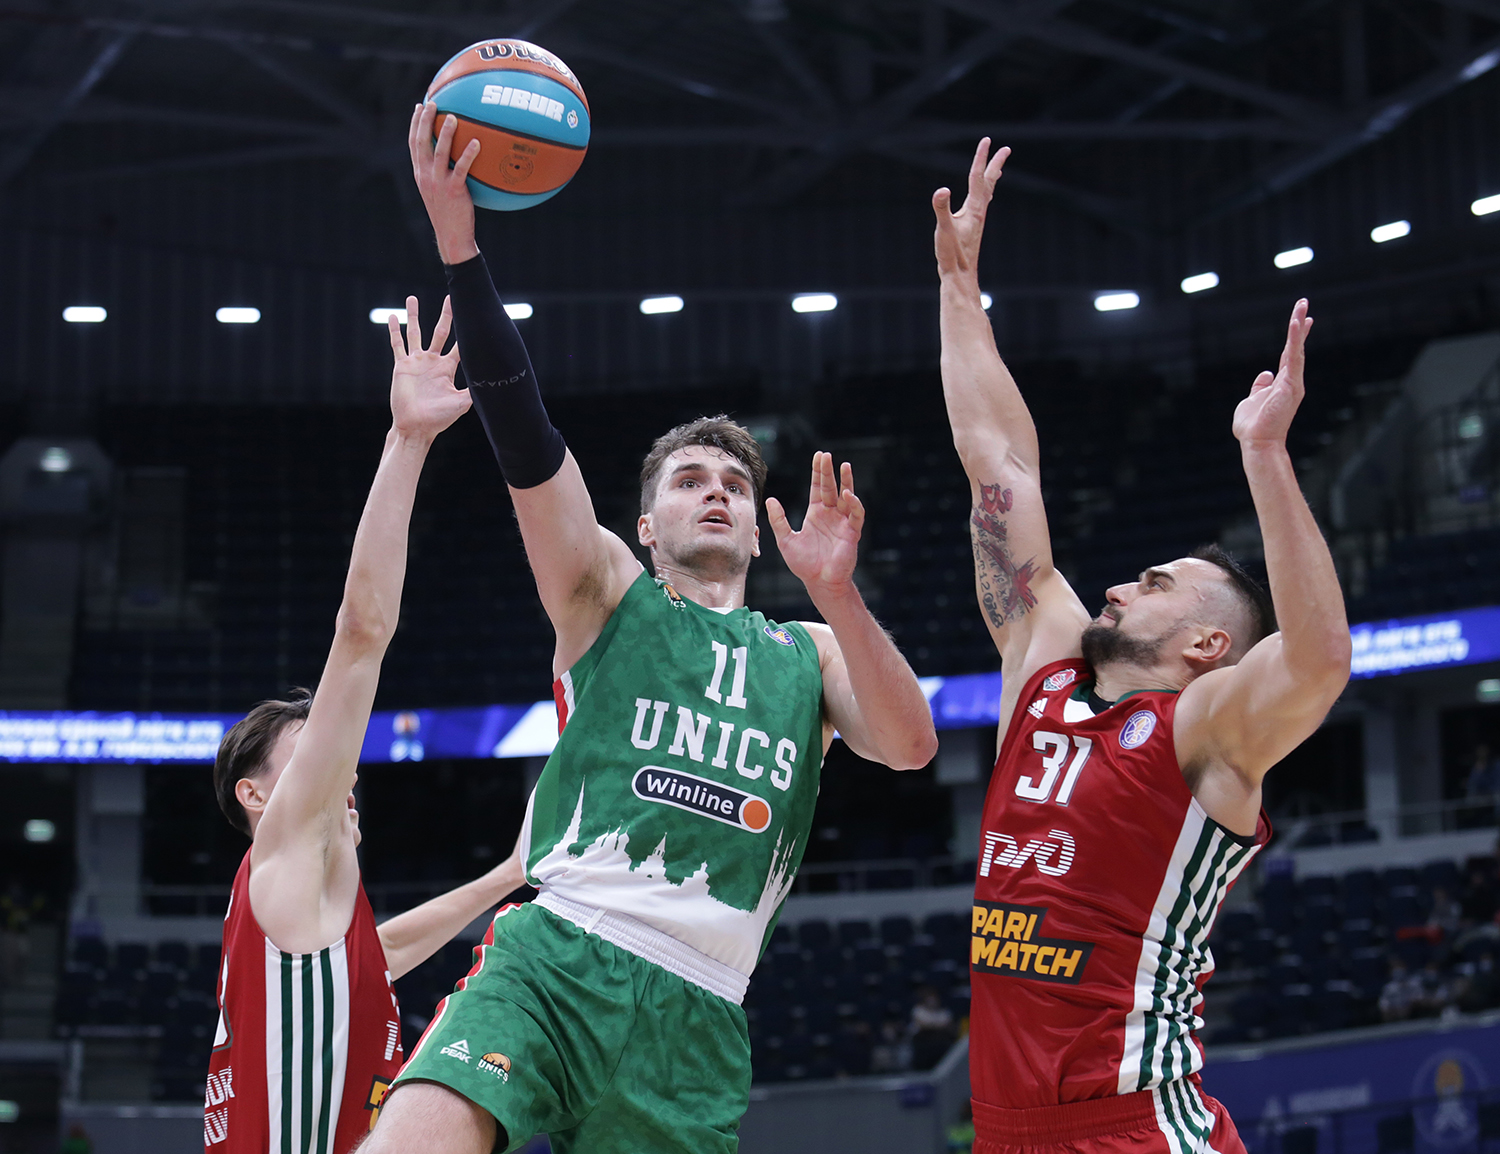 UNICS beat Loko and took 3rd place in the SuperCup